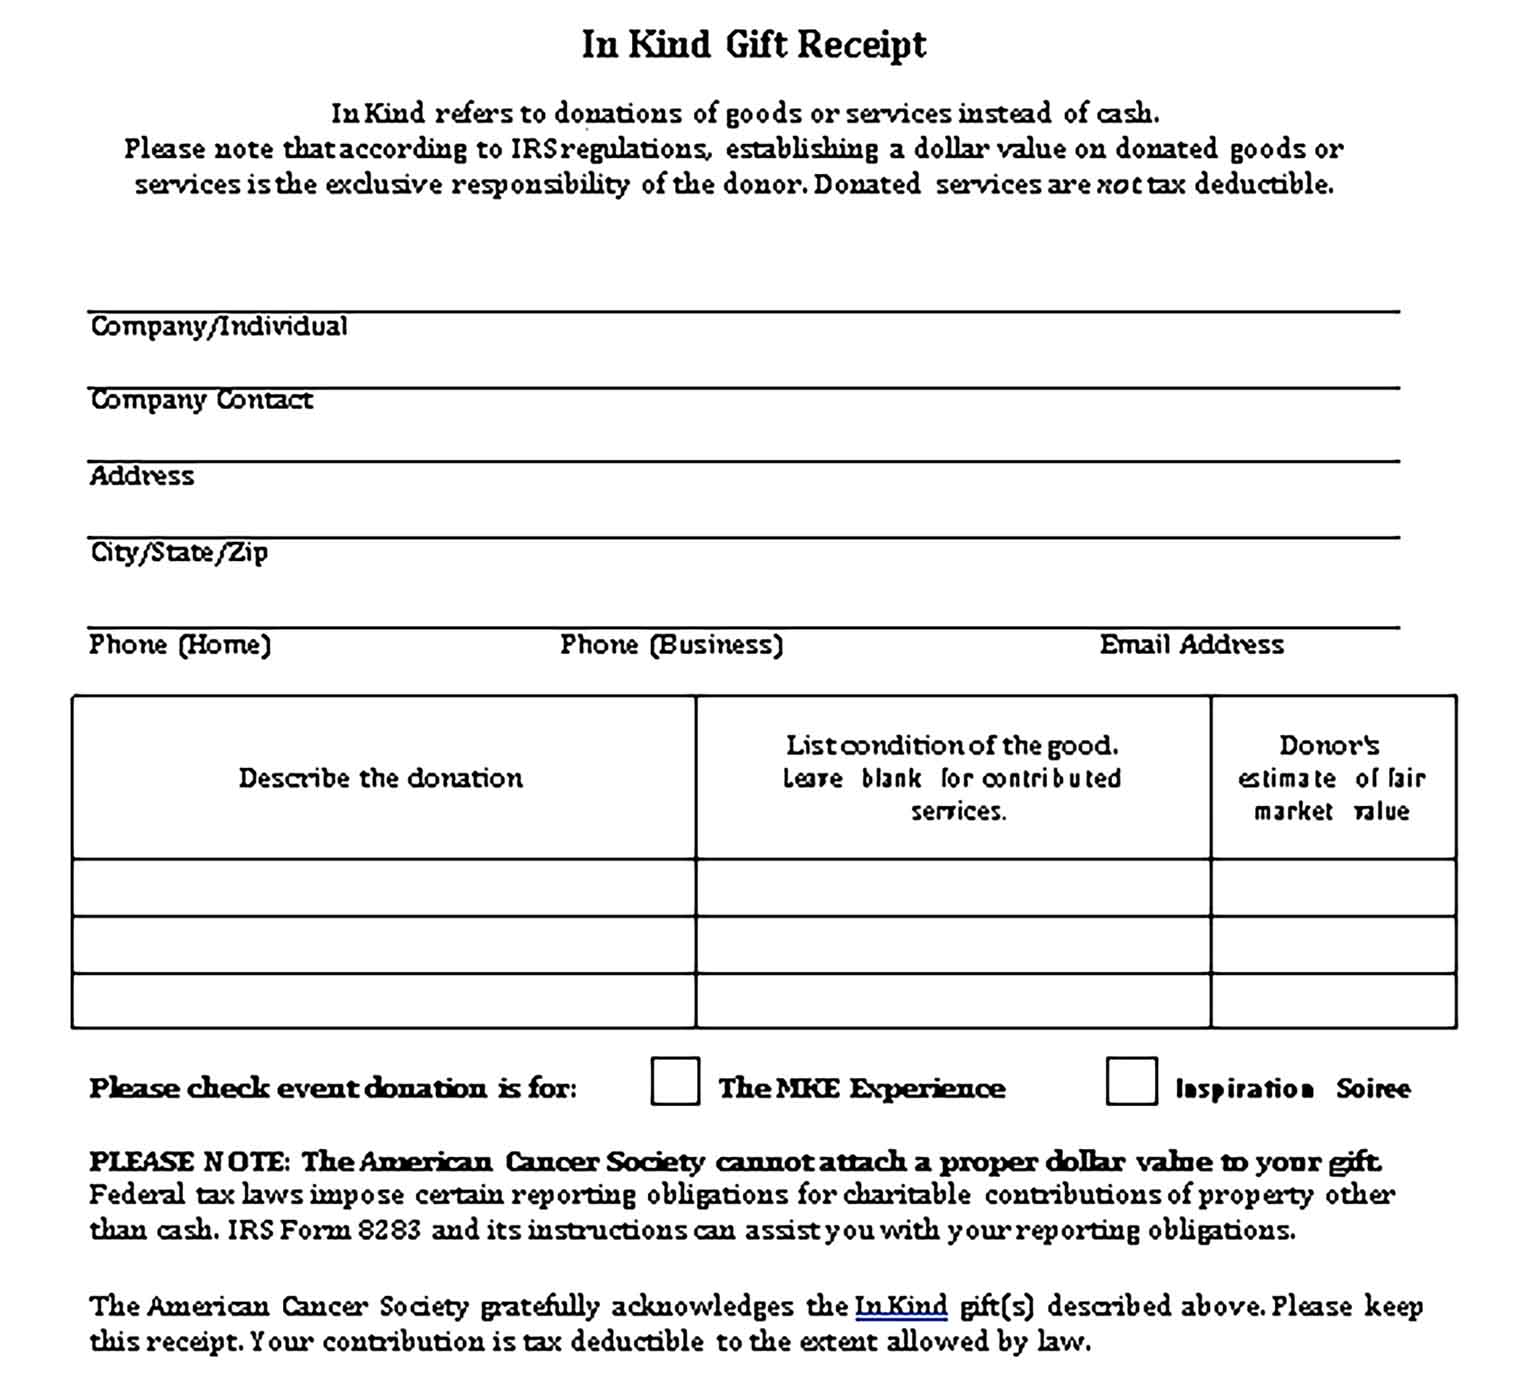 Sample In Kind Gift Receipt Templates